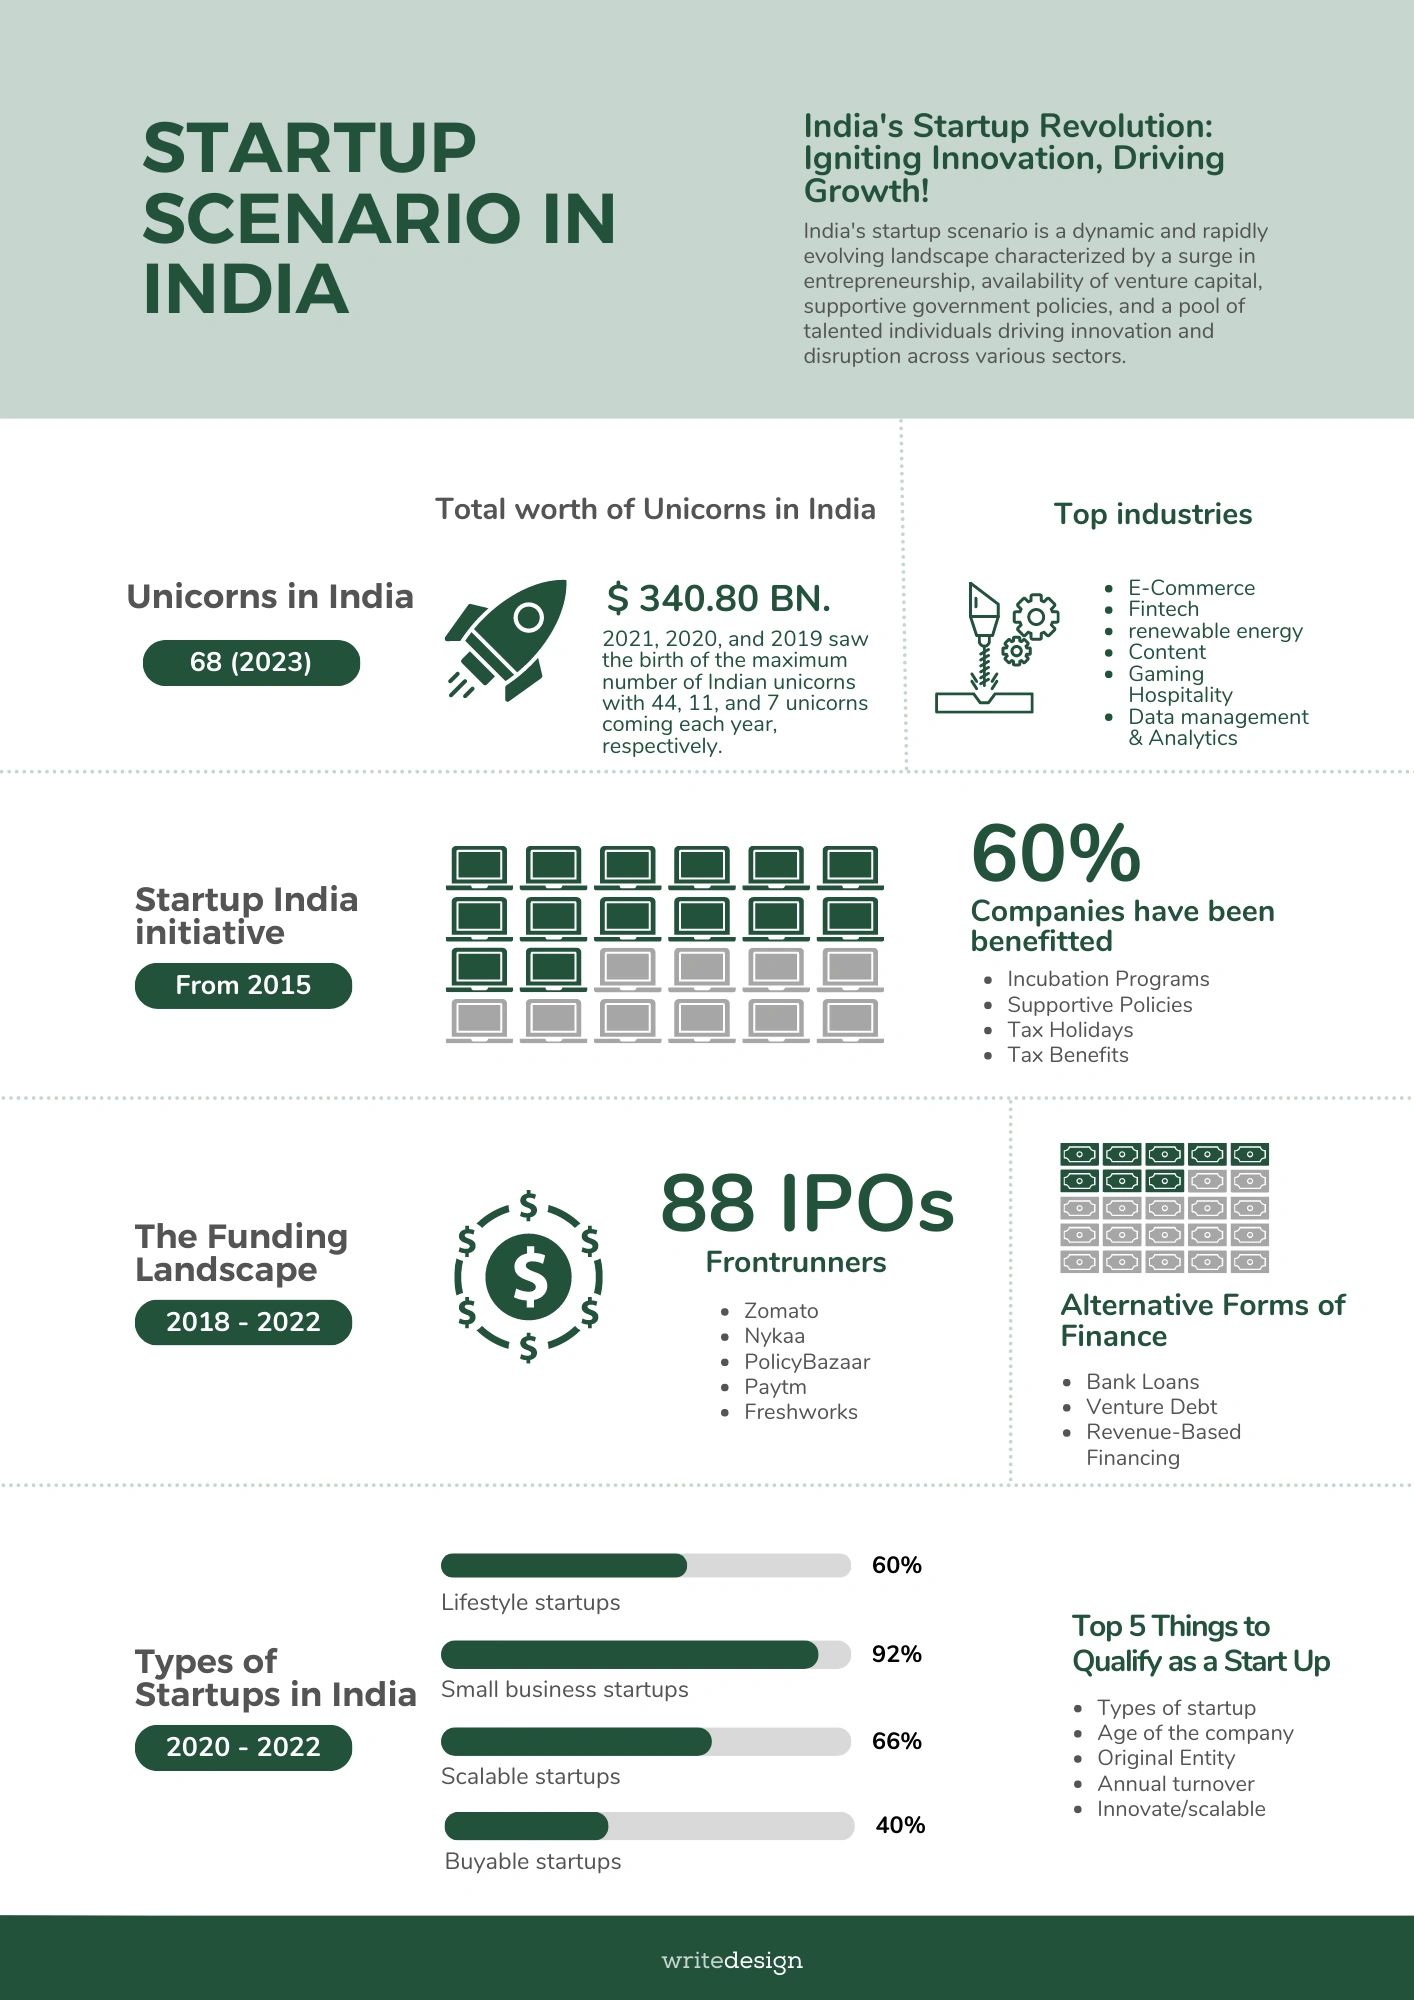 An Infographic on Start-Up Scenario In India